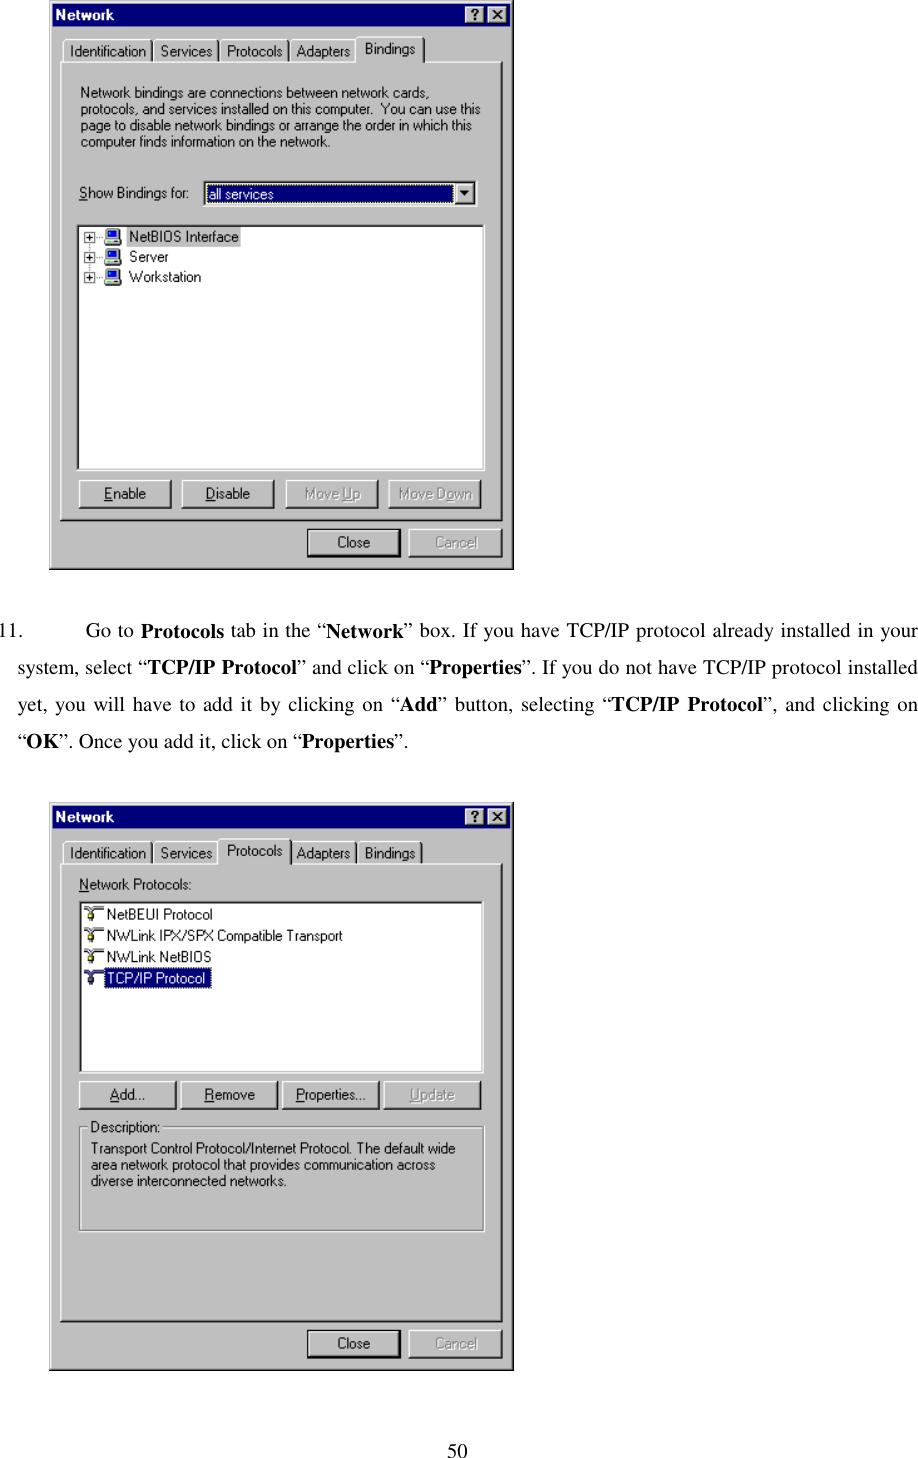   50              11. Go to Protocols tab in the “Network” box. If you have TCP/IP protocol already installed in your system, select “TCP/IP Protocol” and click on “Properties”. If you do not have TCP/IP protocol installed yet, you will have to add it by clicking on “Add” button, selecting “TCP/IP Protocol”, and clicking on “OK”. Once you add it, click on “Properties”.               